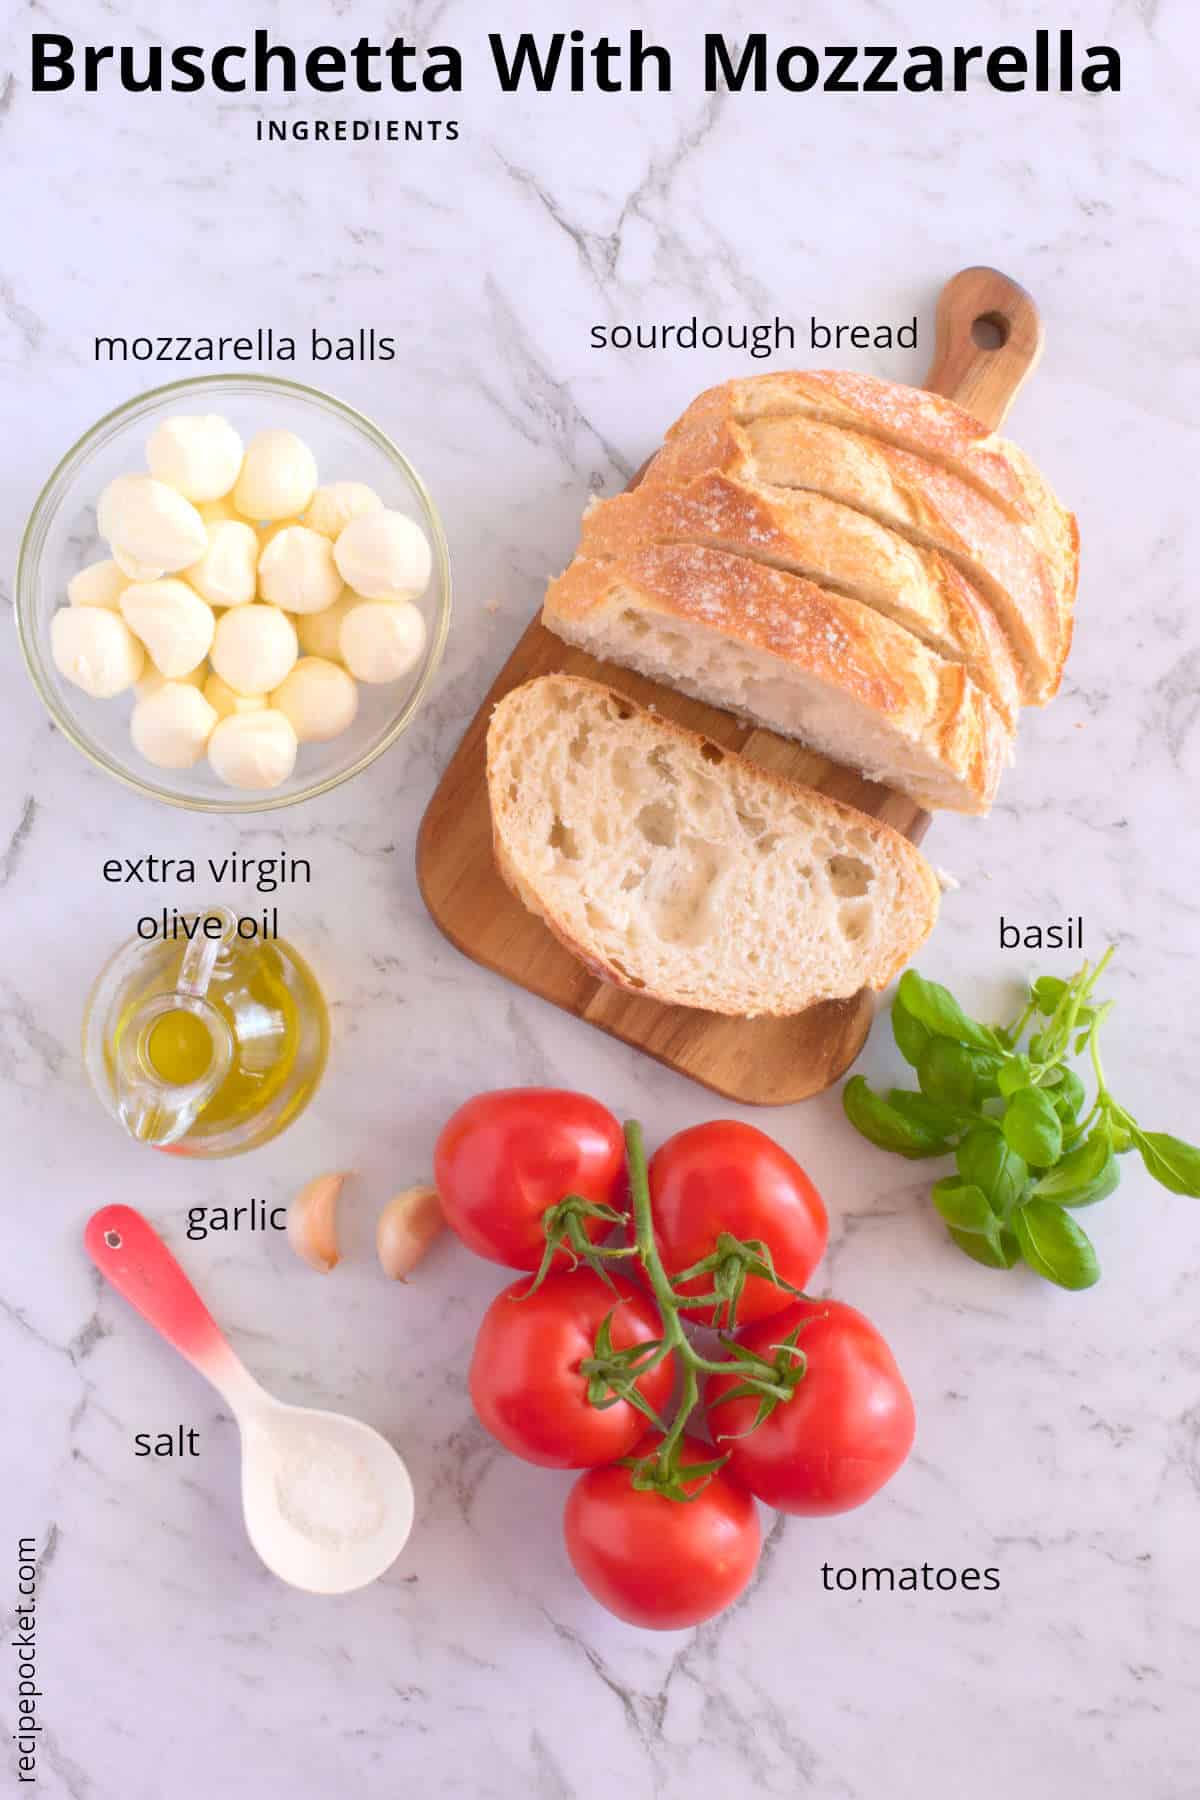 Image with ingredients needed to make bruschetta with mozzarella.